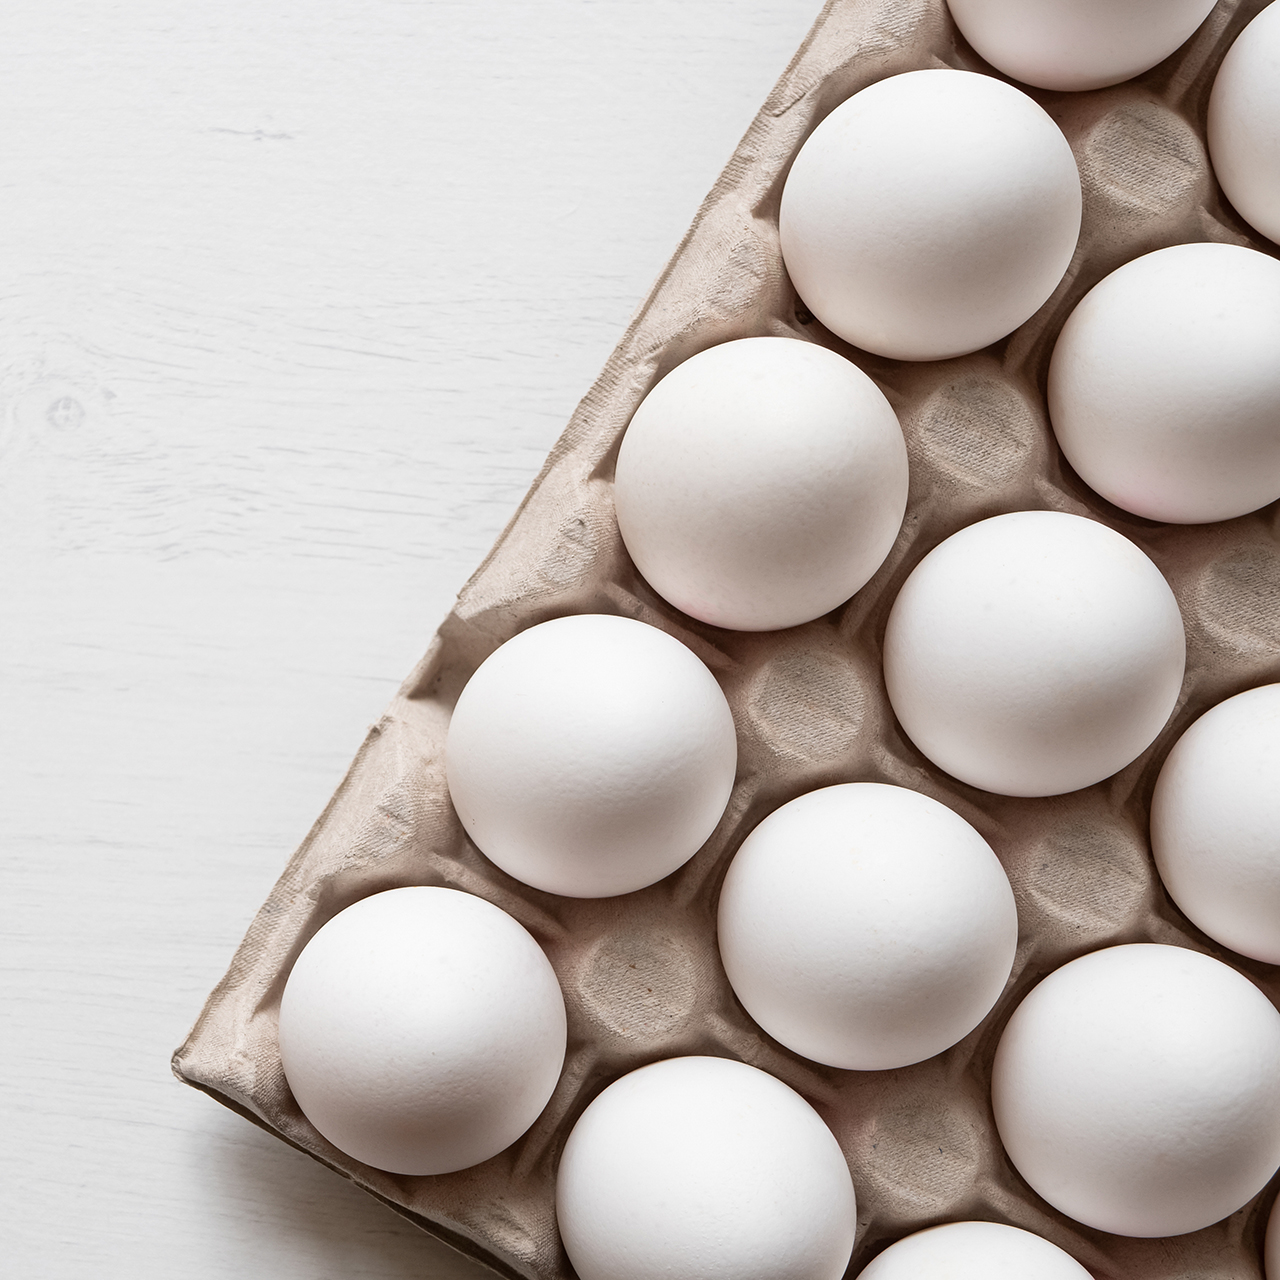 Detail of white chicken eggs in paper tray.